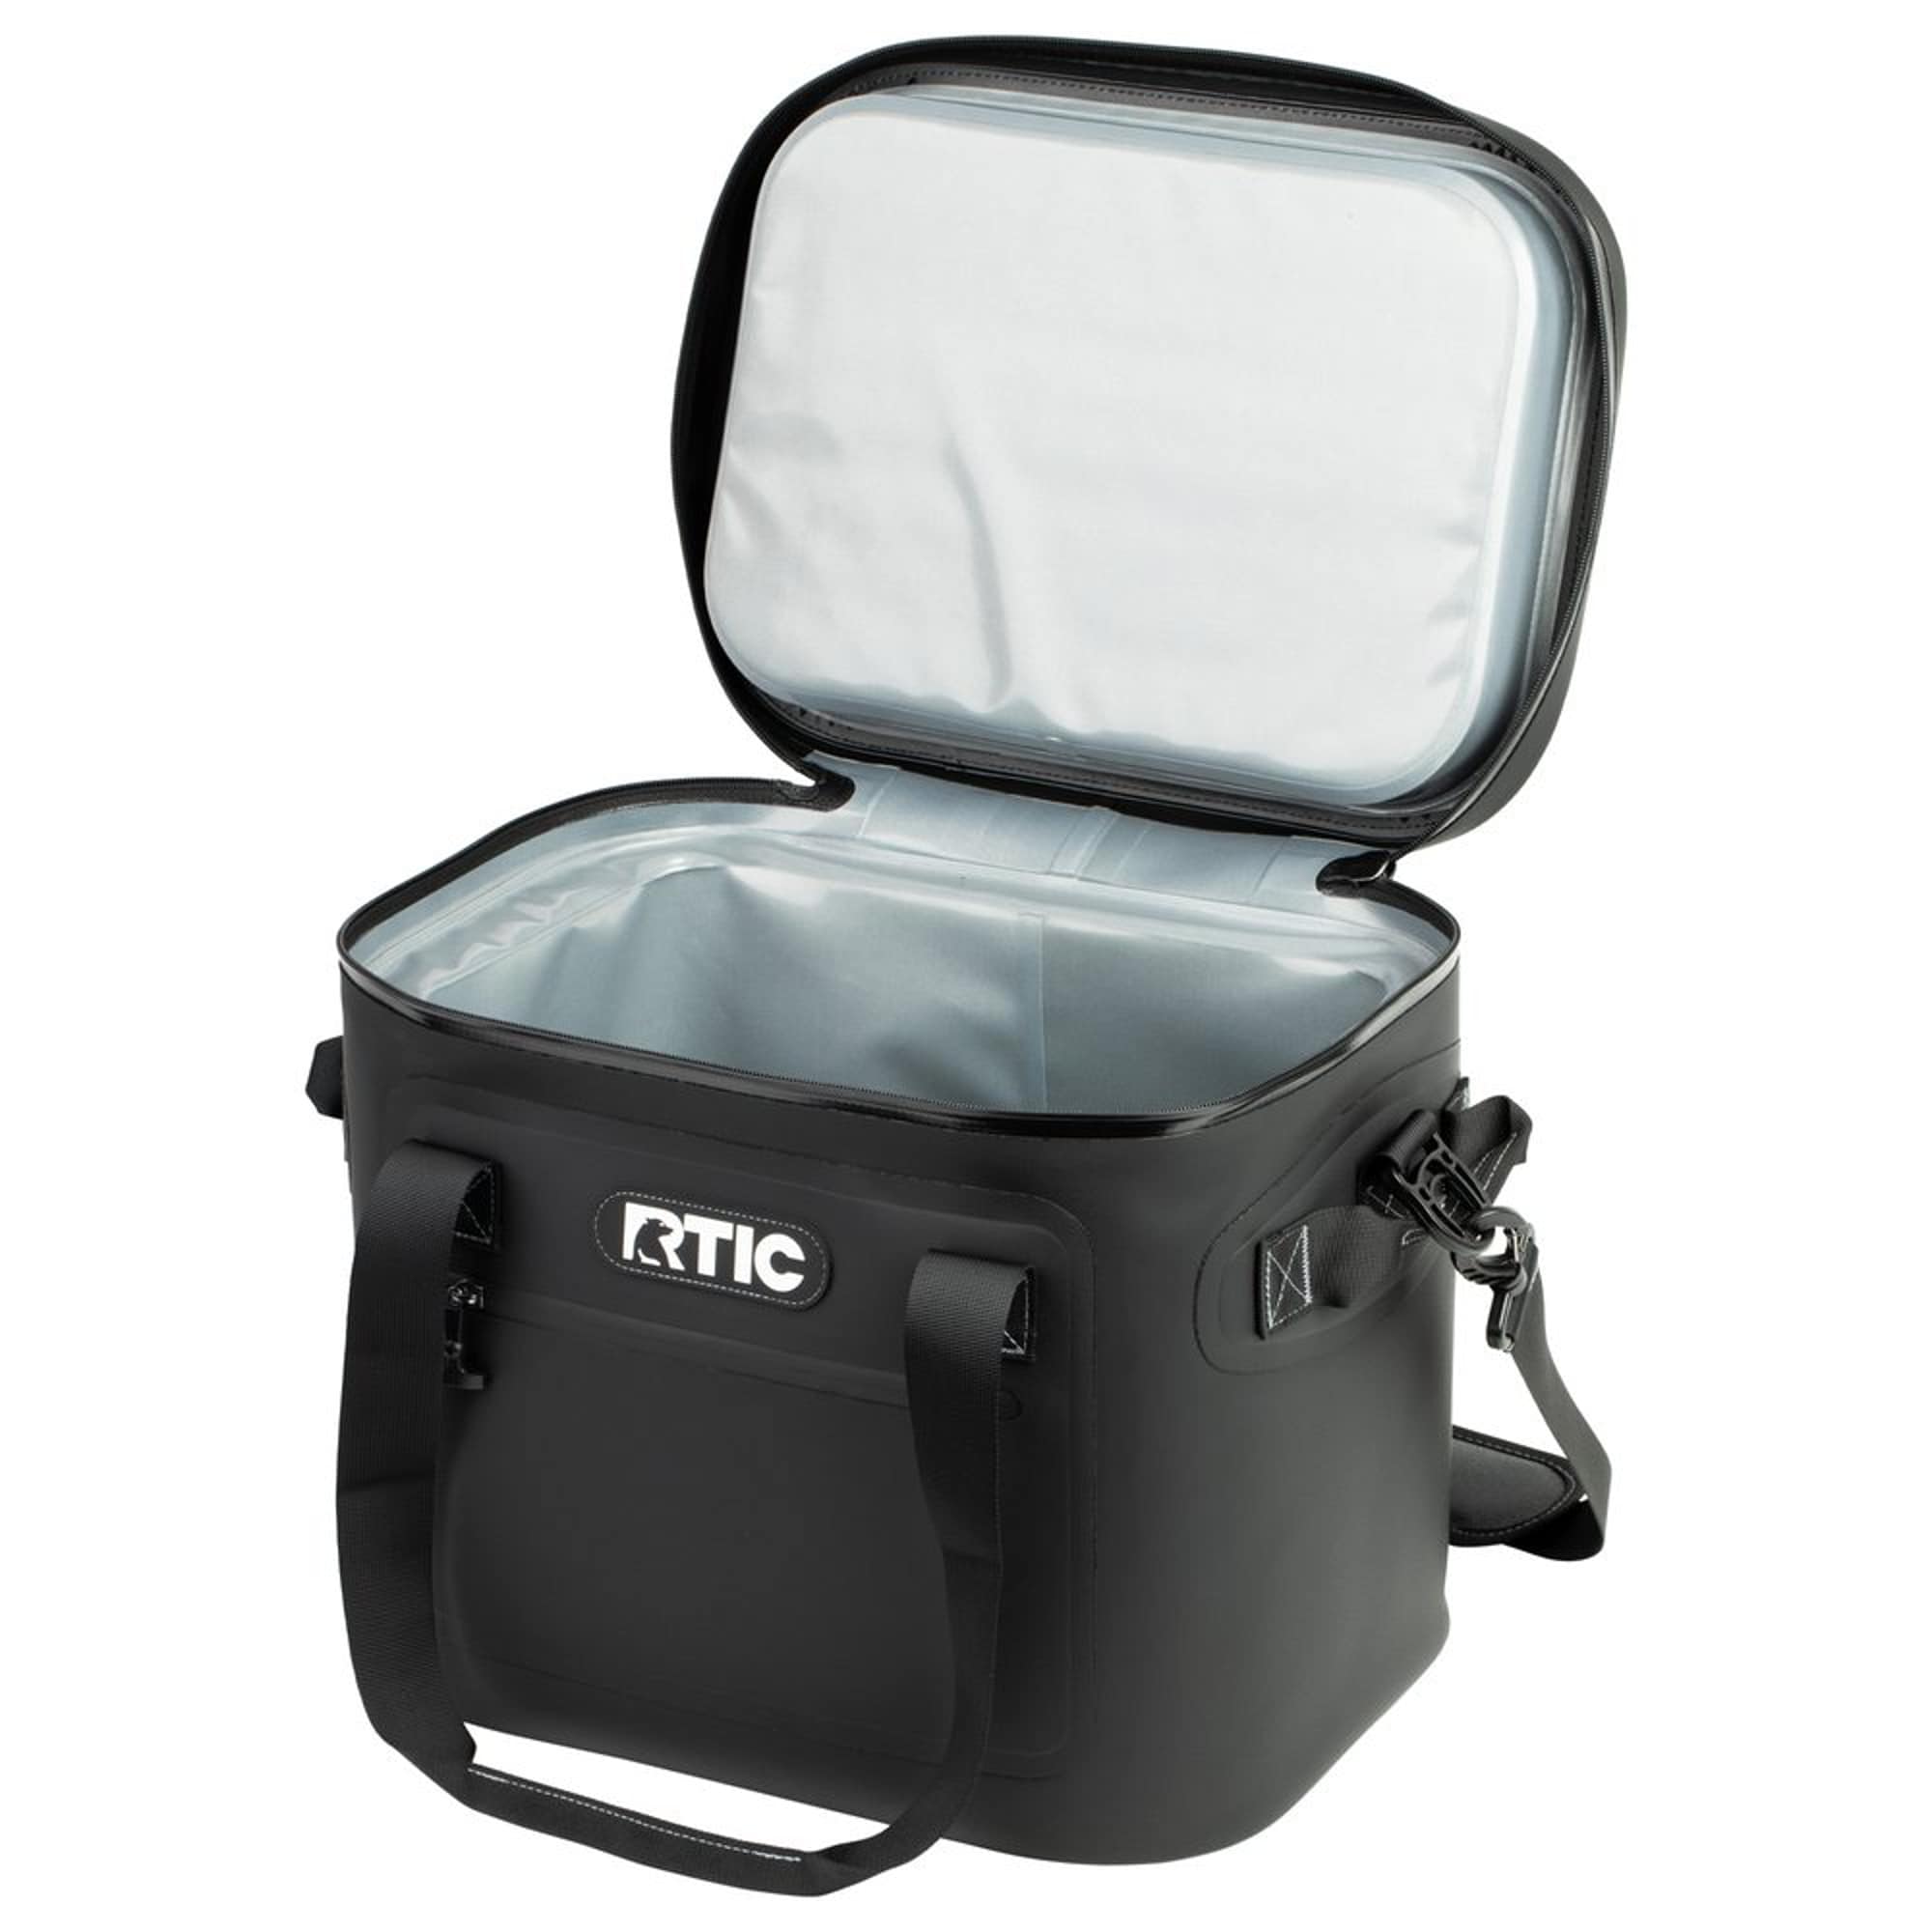 RTIC Outdoors - Yeah, it floats. The RTIC Soft Pack 30.